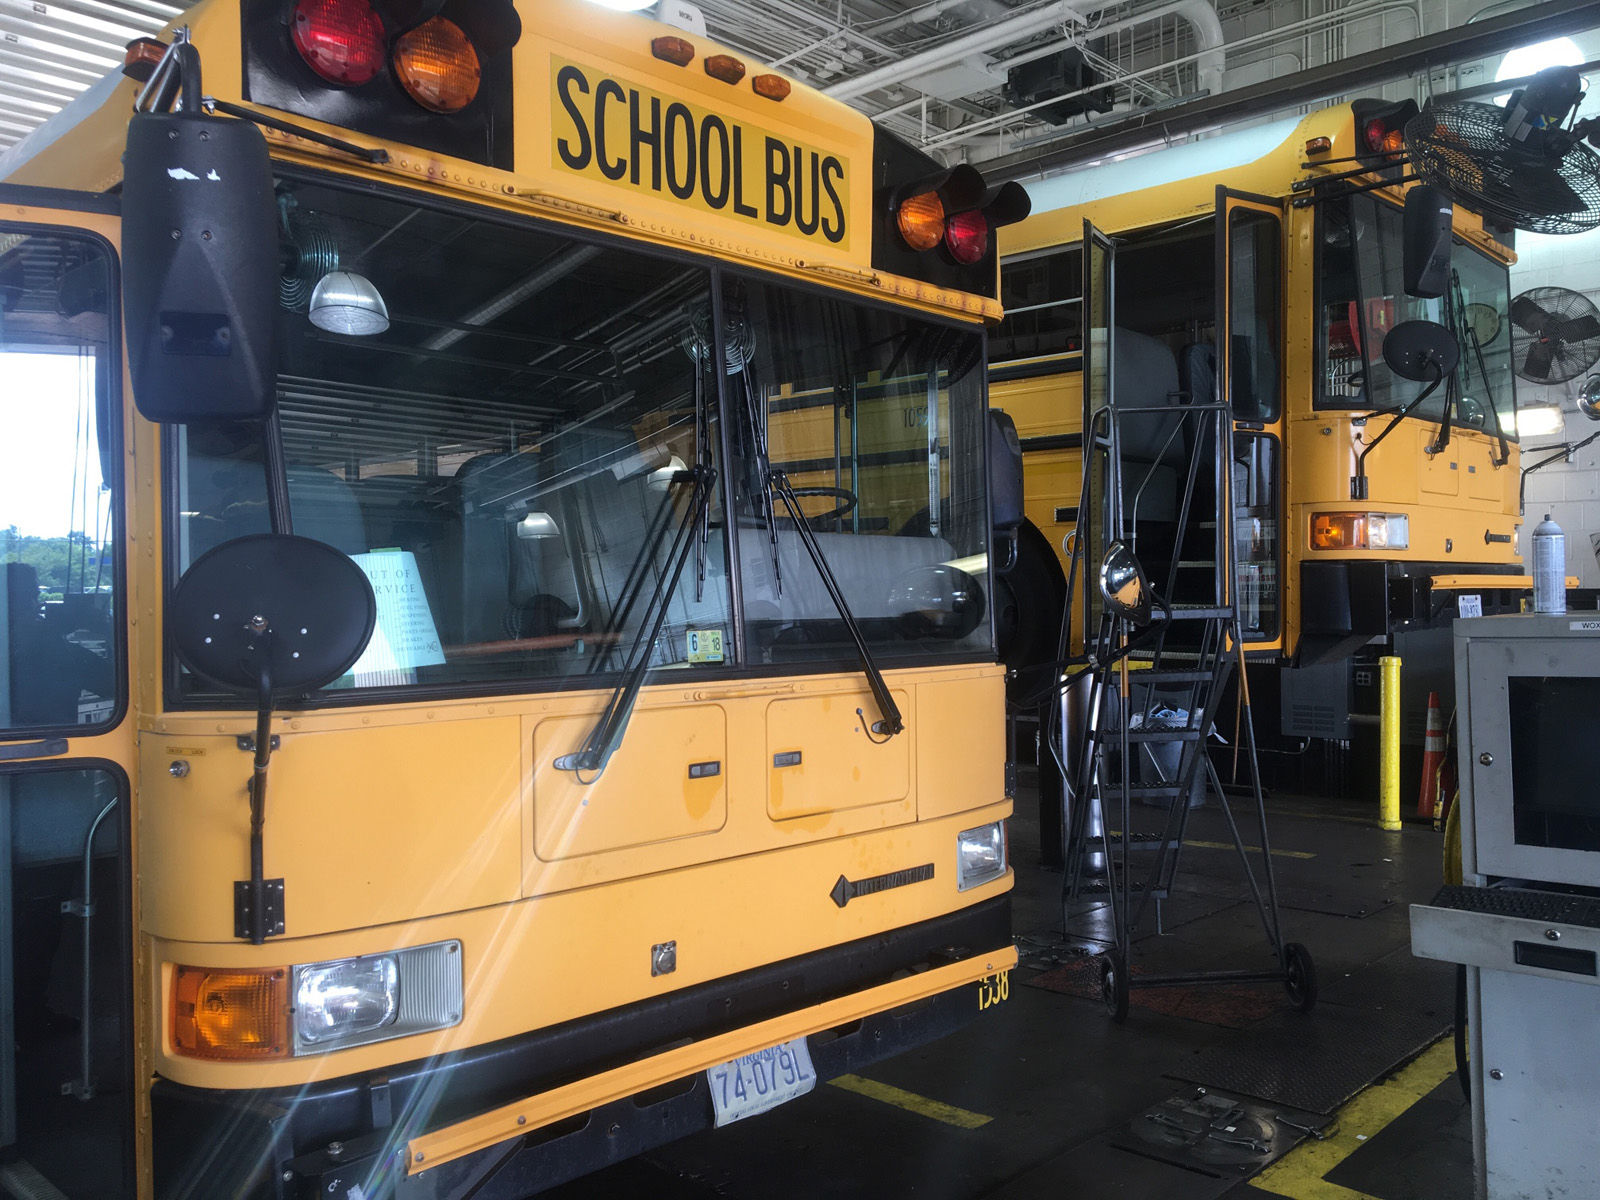 A Fairfax County school bus is seen in this WTOP file photo. (WTOP/Max Smith)